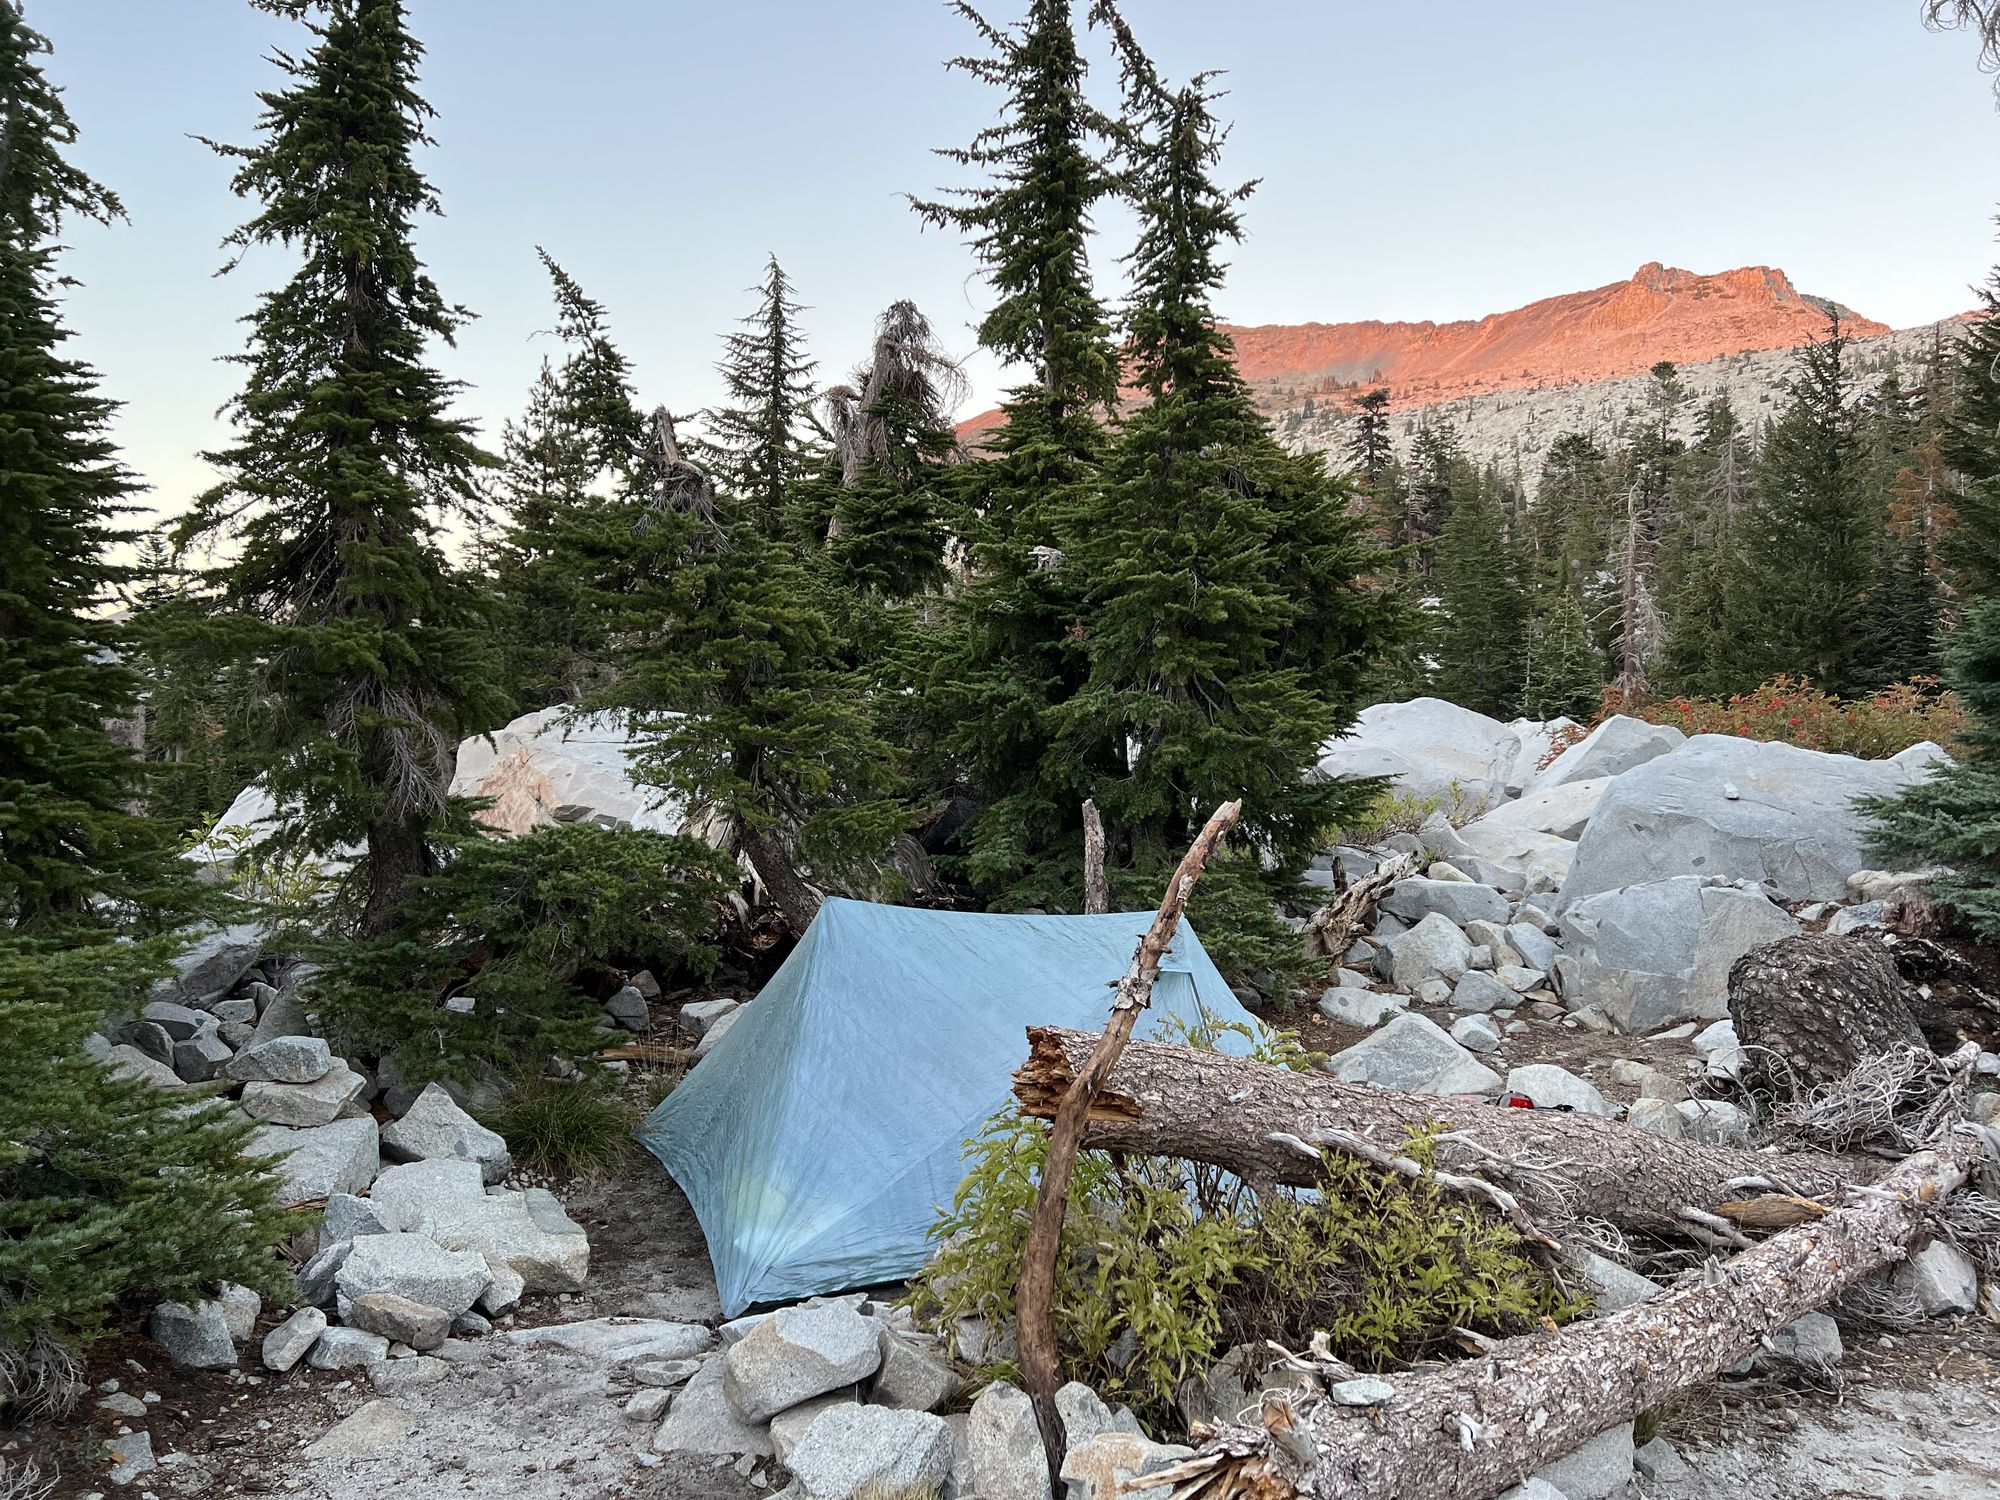 A tent nestled between rocks and a log.